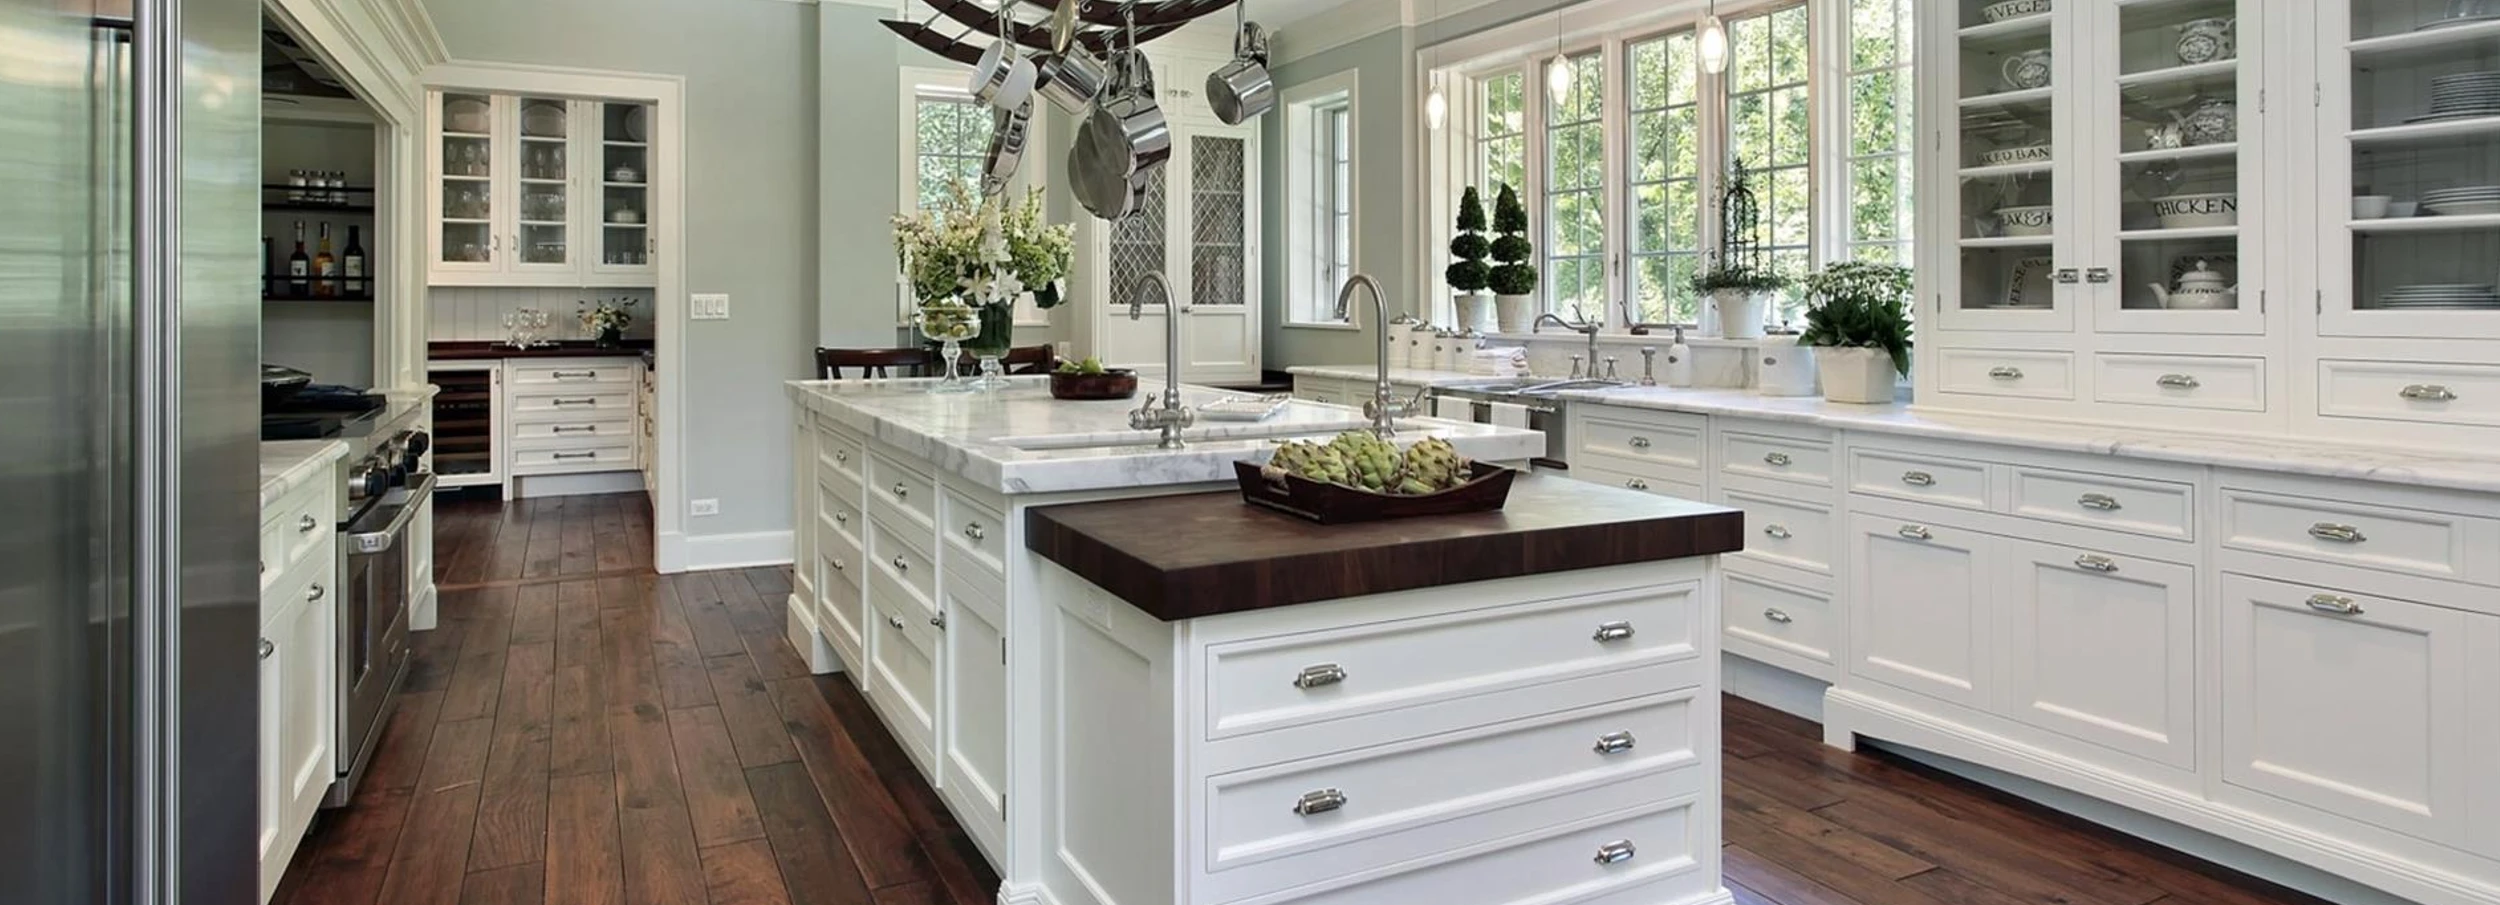 Marble top kitchen island in large, bright modern kitchen with dark hardwood floor and white cabinets professionally painted by Five Star Painting.